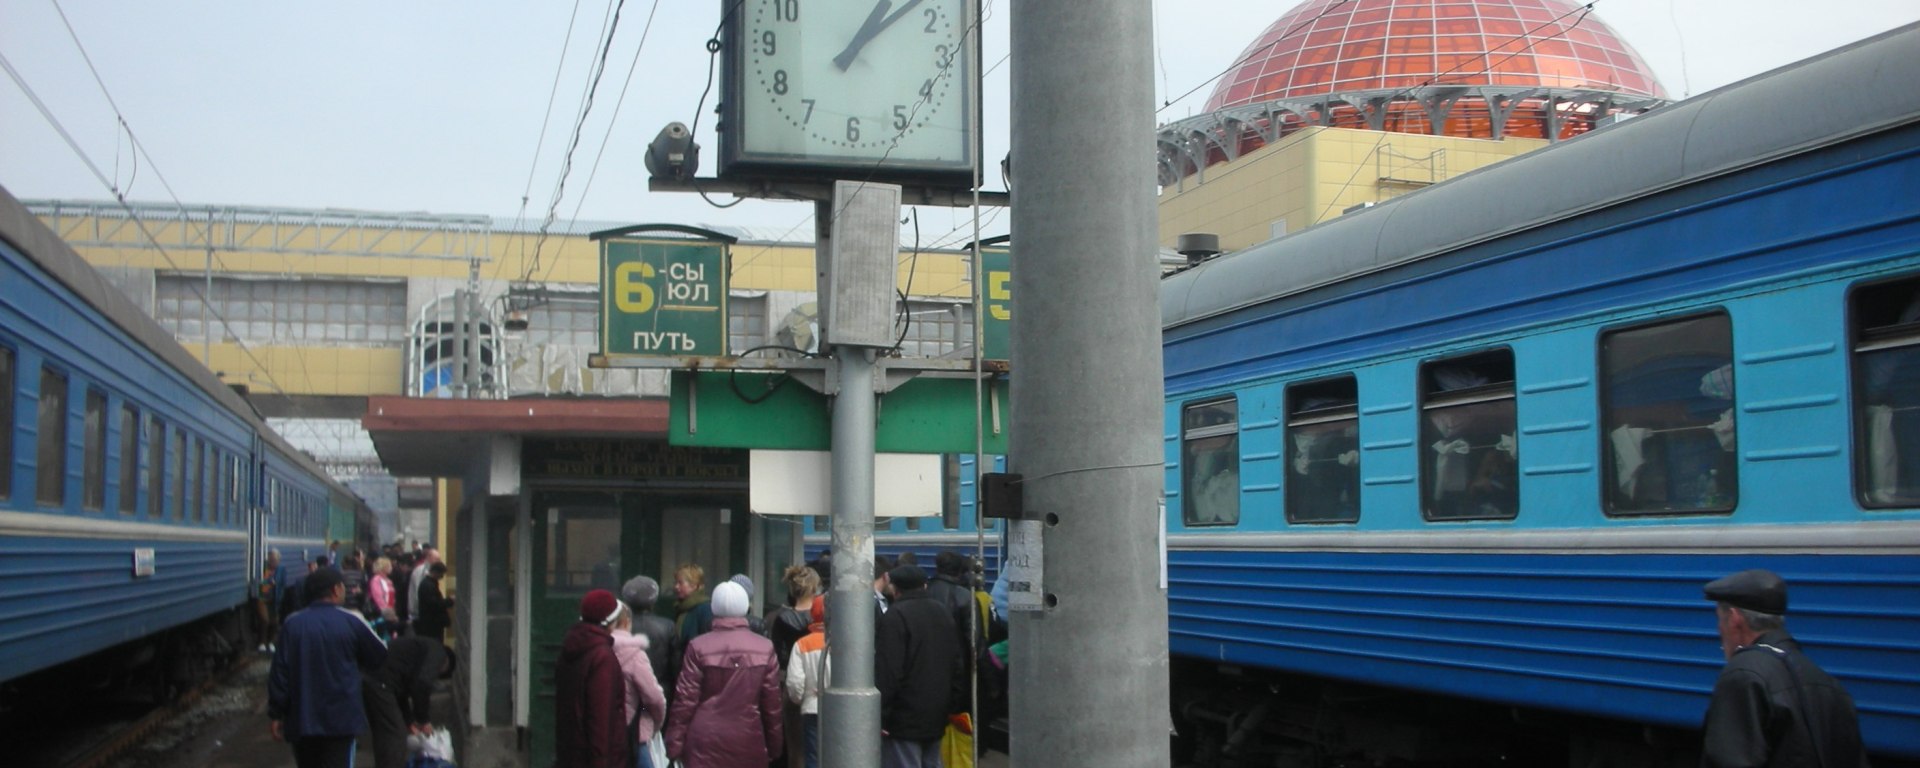 a train station platform in Russia with two waiting passenger trains and clock in foreground